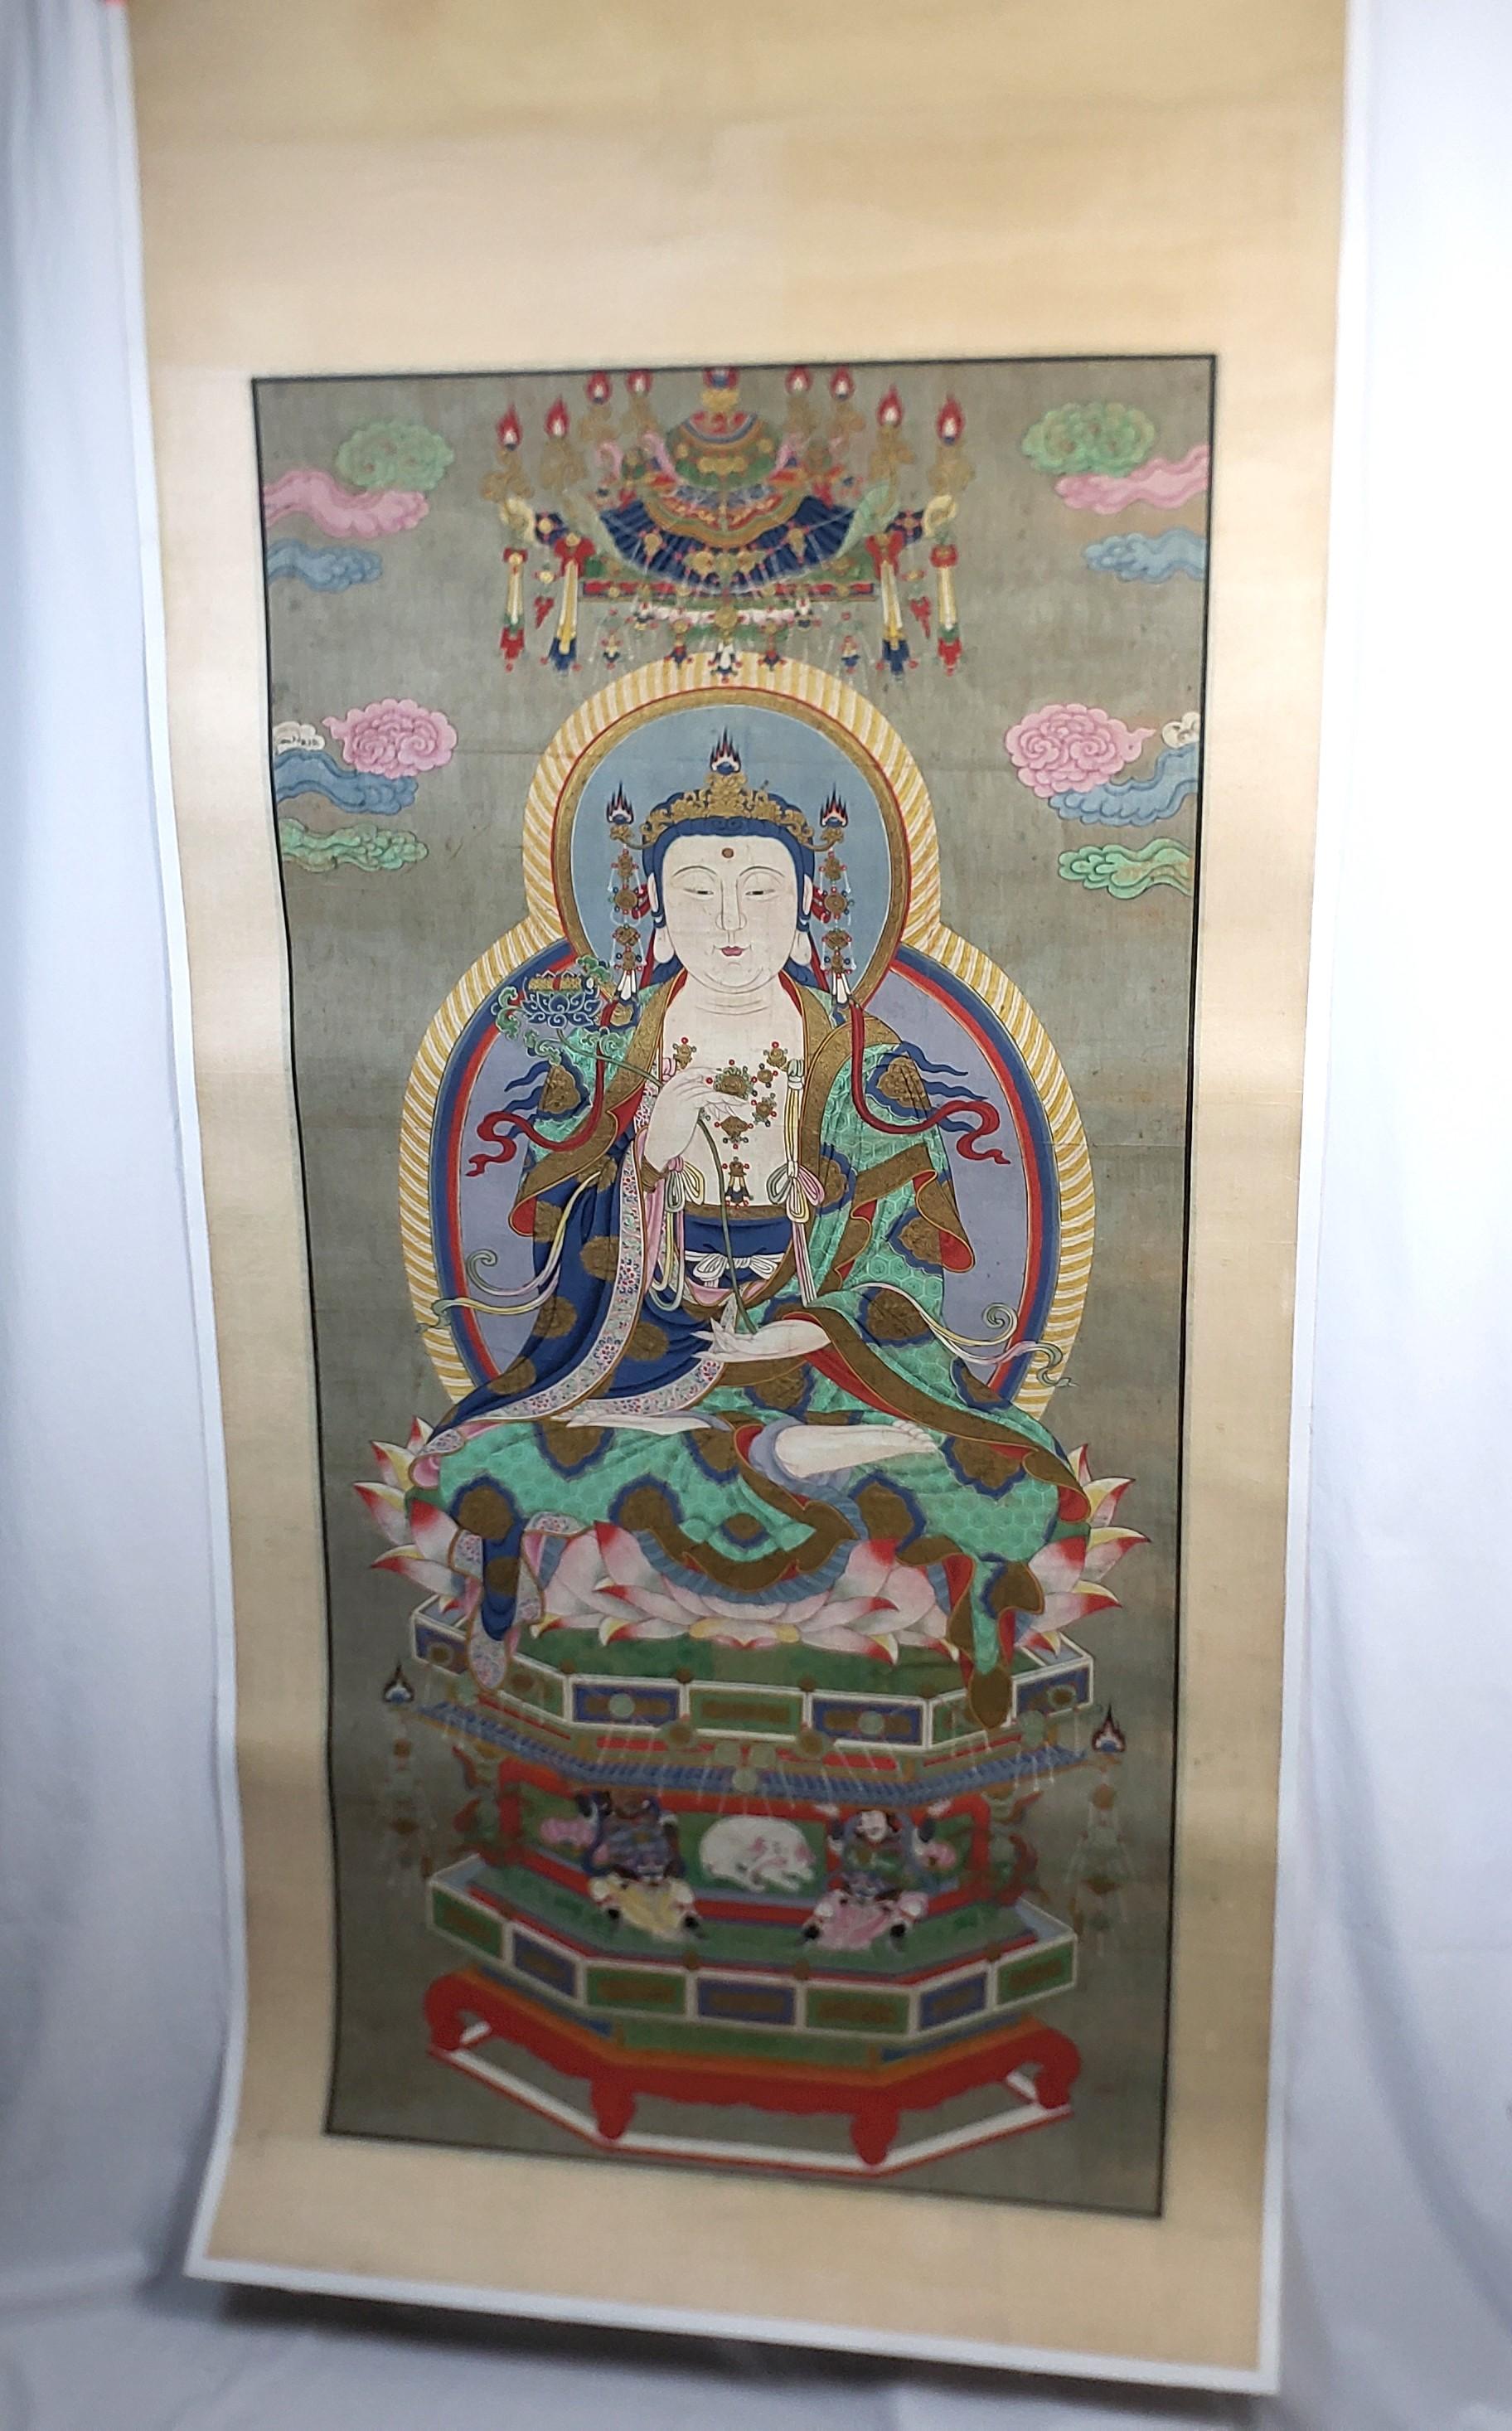 19th Century Large Antique Chinese Qing Dynasty Hand-Painted Buddhist Scroll on Silk For Sale